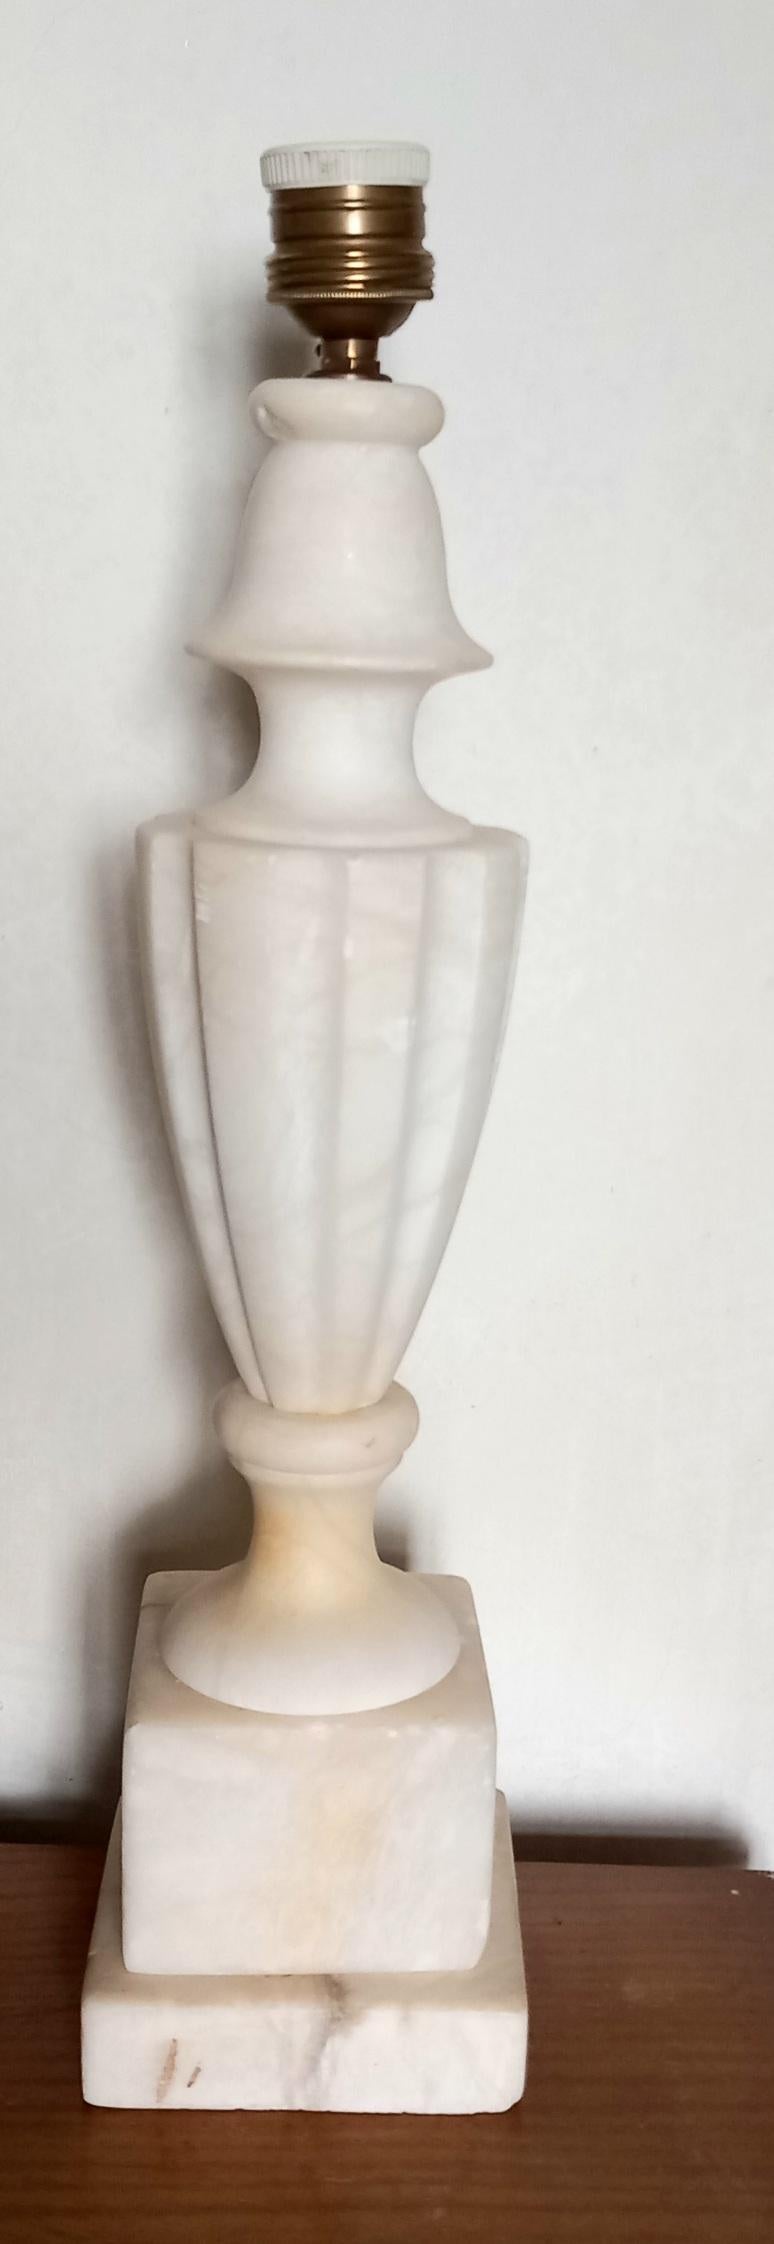 Table Lamp Alabaster or Marble White Art Deco  Large  Early 20th Century Spain For Sale 4